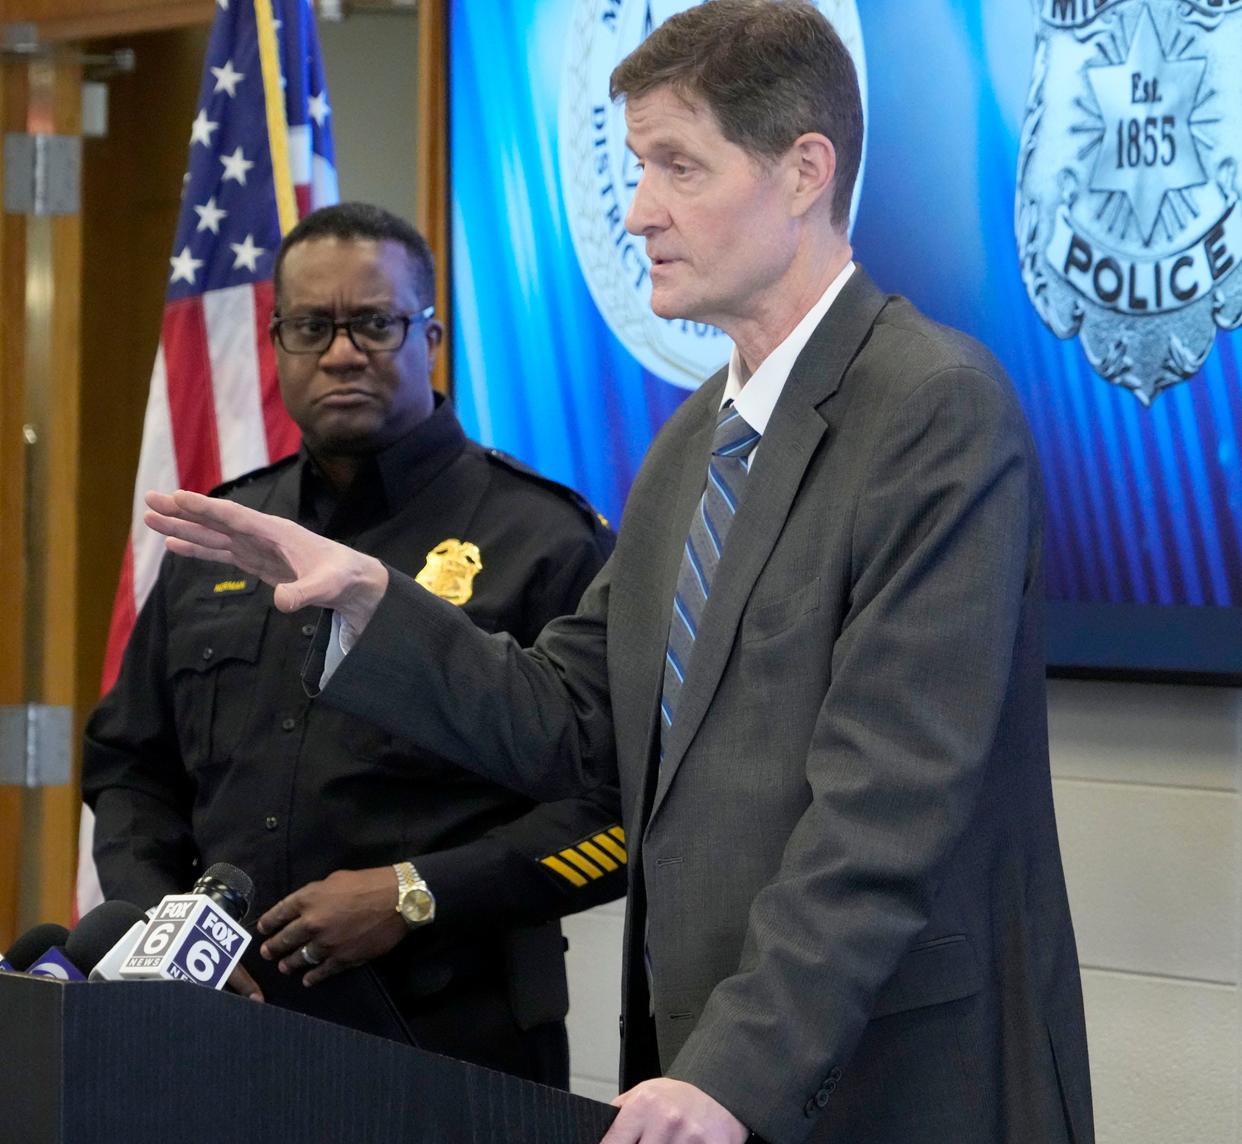 Milwaukee County District Attorney John Chisholm (right) with Milwaukee Police Chief Jeffery Norman announce charges against a violent group of individuals during a press conference at the Milwaukee Police Administration Building on Monday.